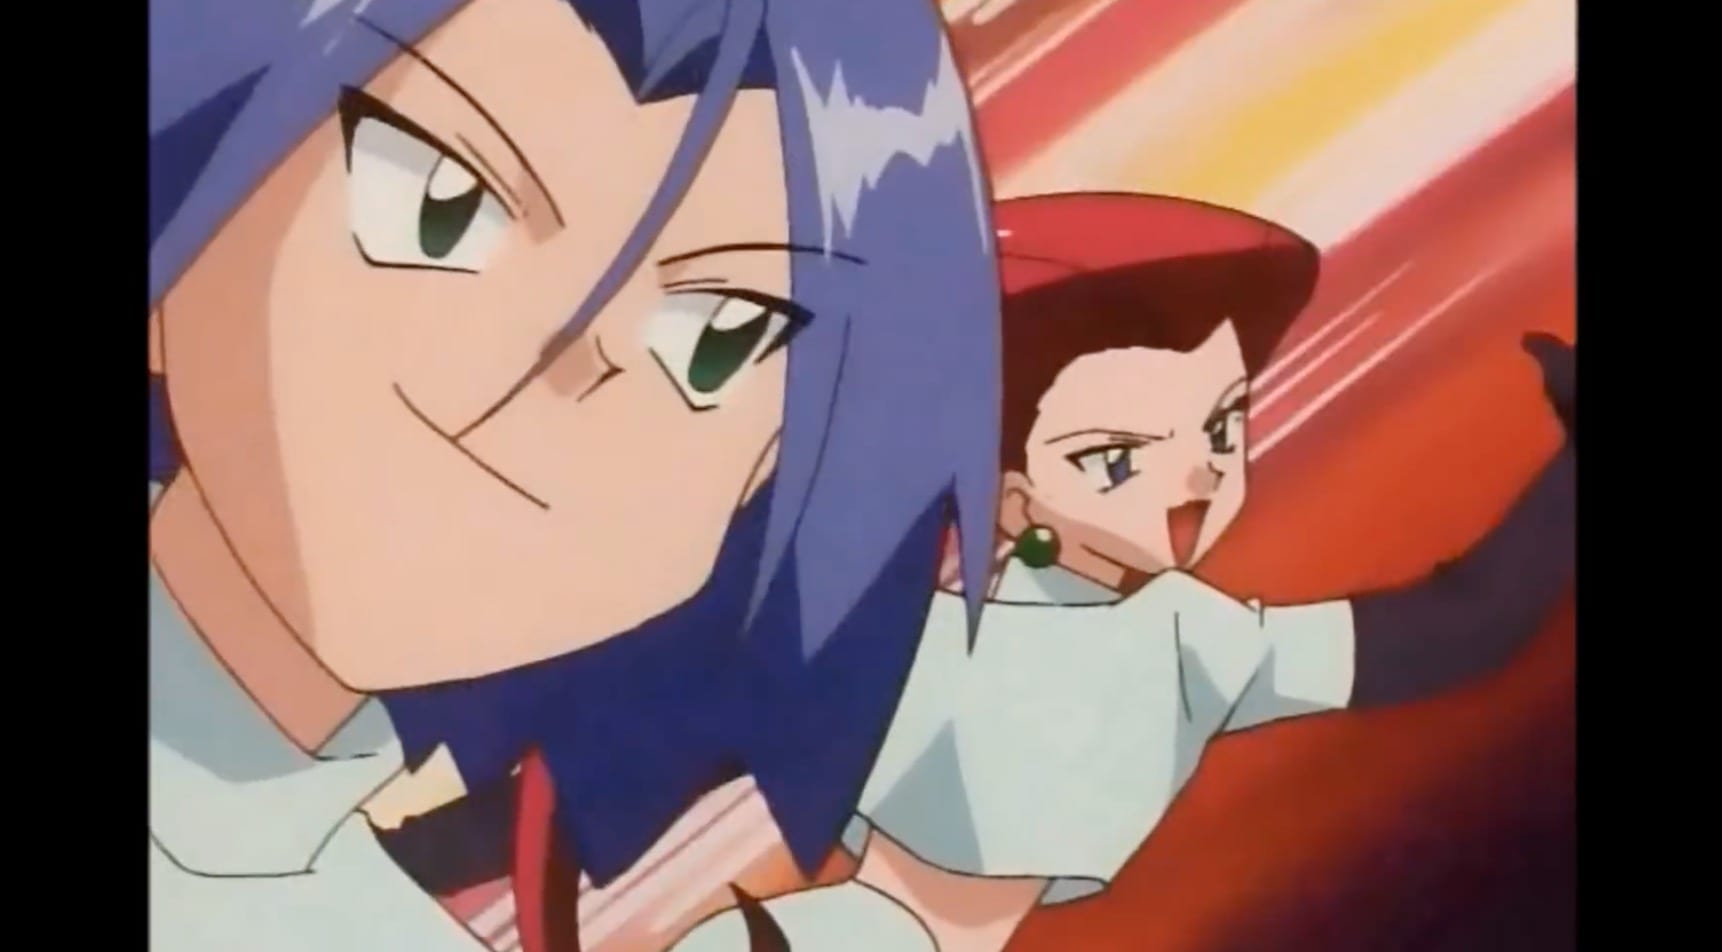 Pokemon Sword and Shield Player Dressed up Their Characters as Team Rocket's  Jessie and James